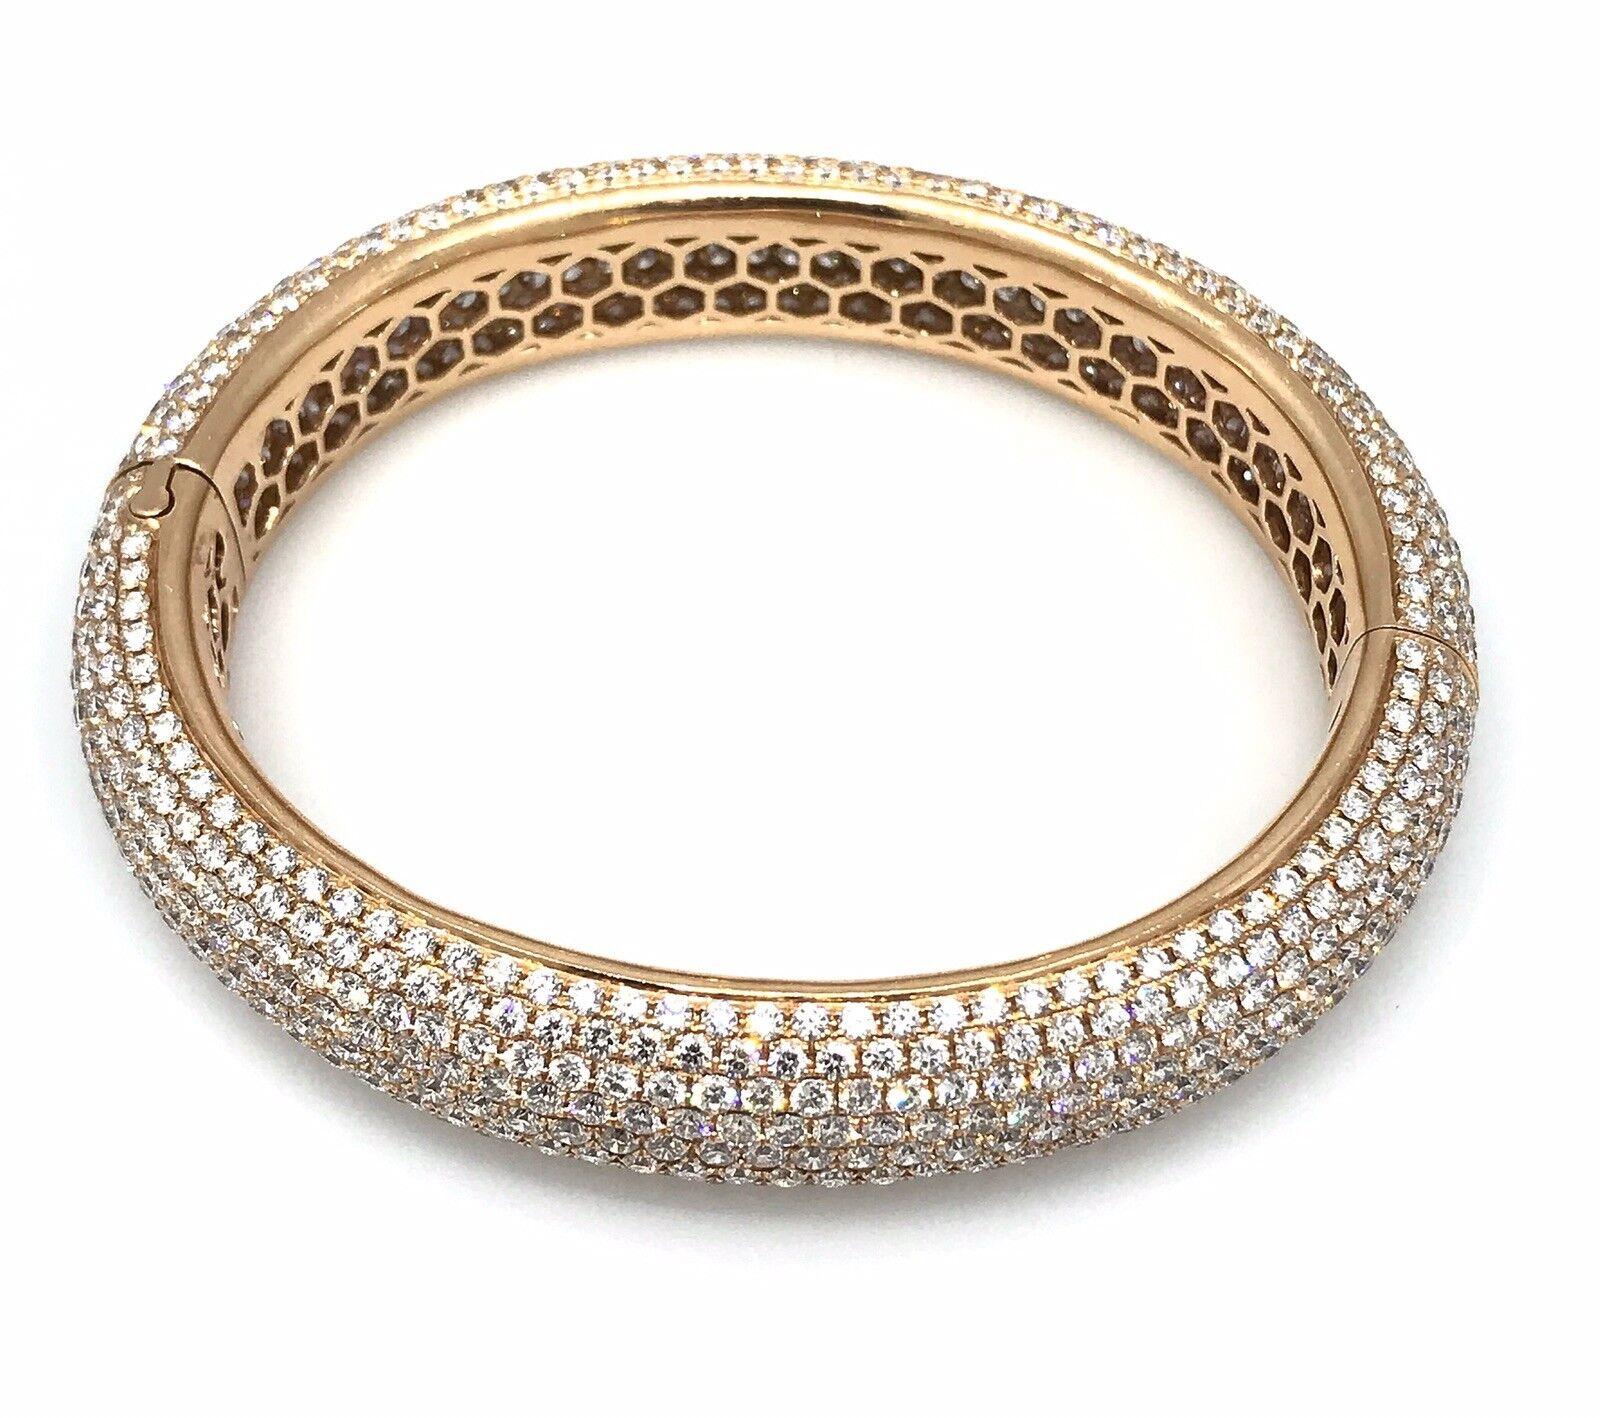 24.25 Carats Diamond Pave Bangle Bracelet in 18k Rose Gold In Excellent Condition For Sale In La Jolla, CA